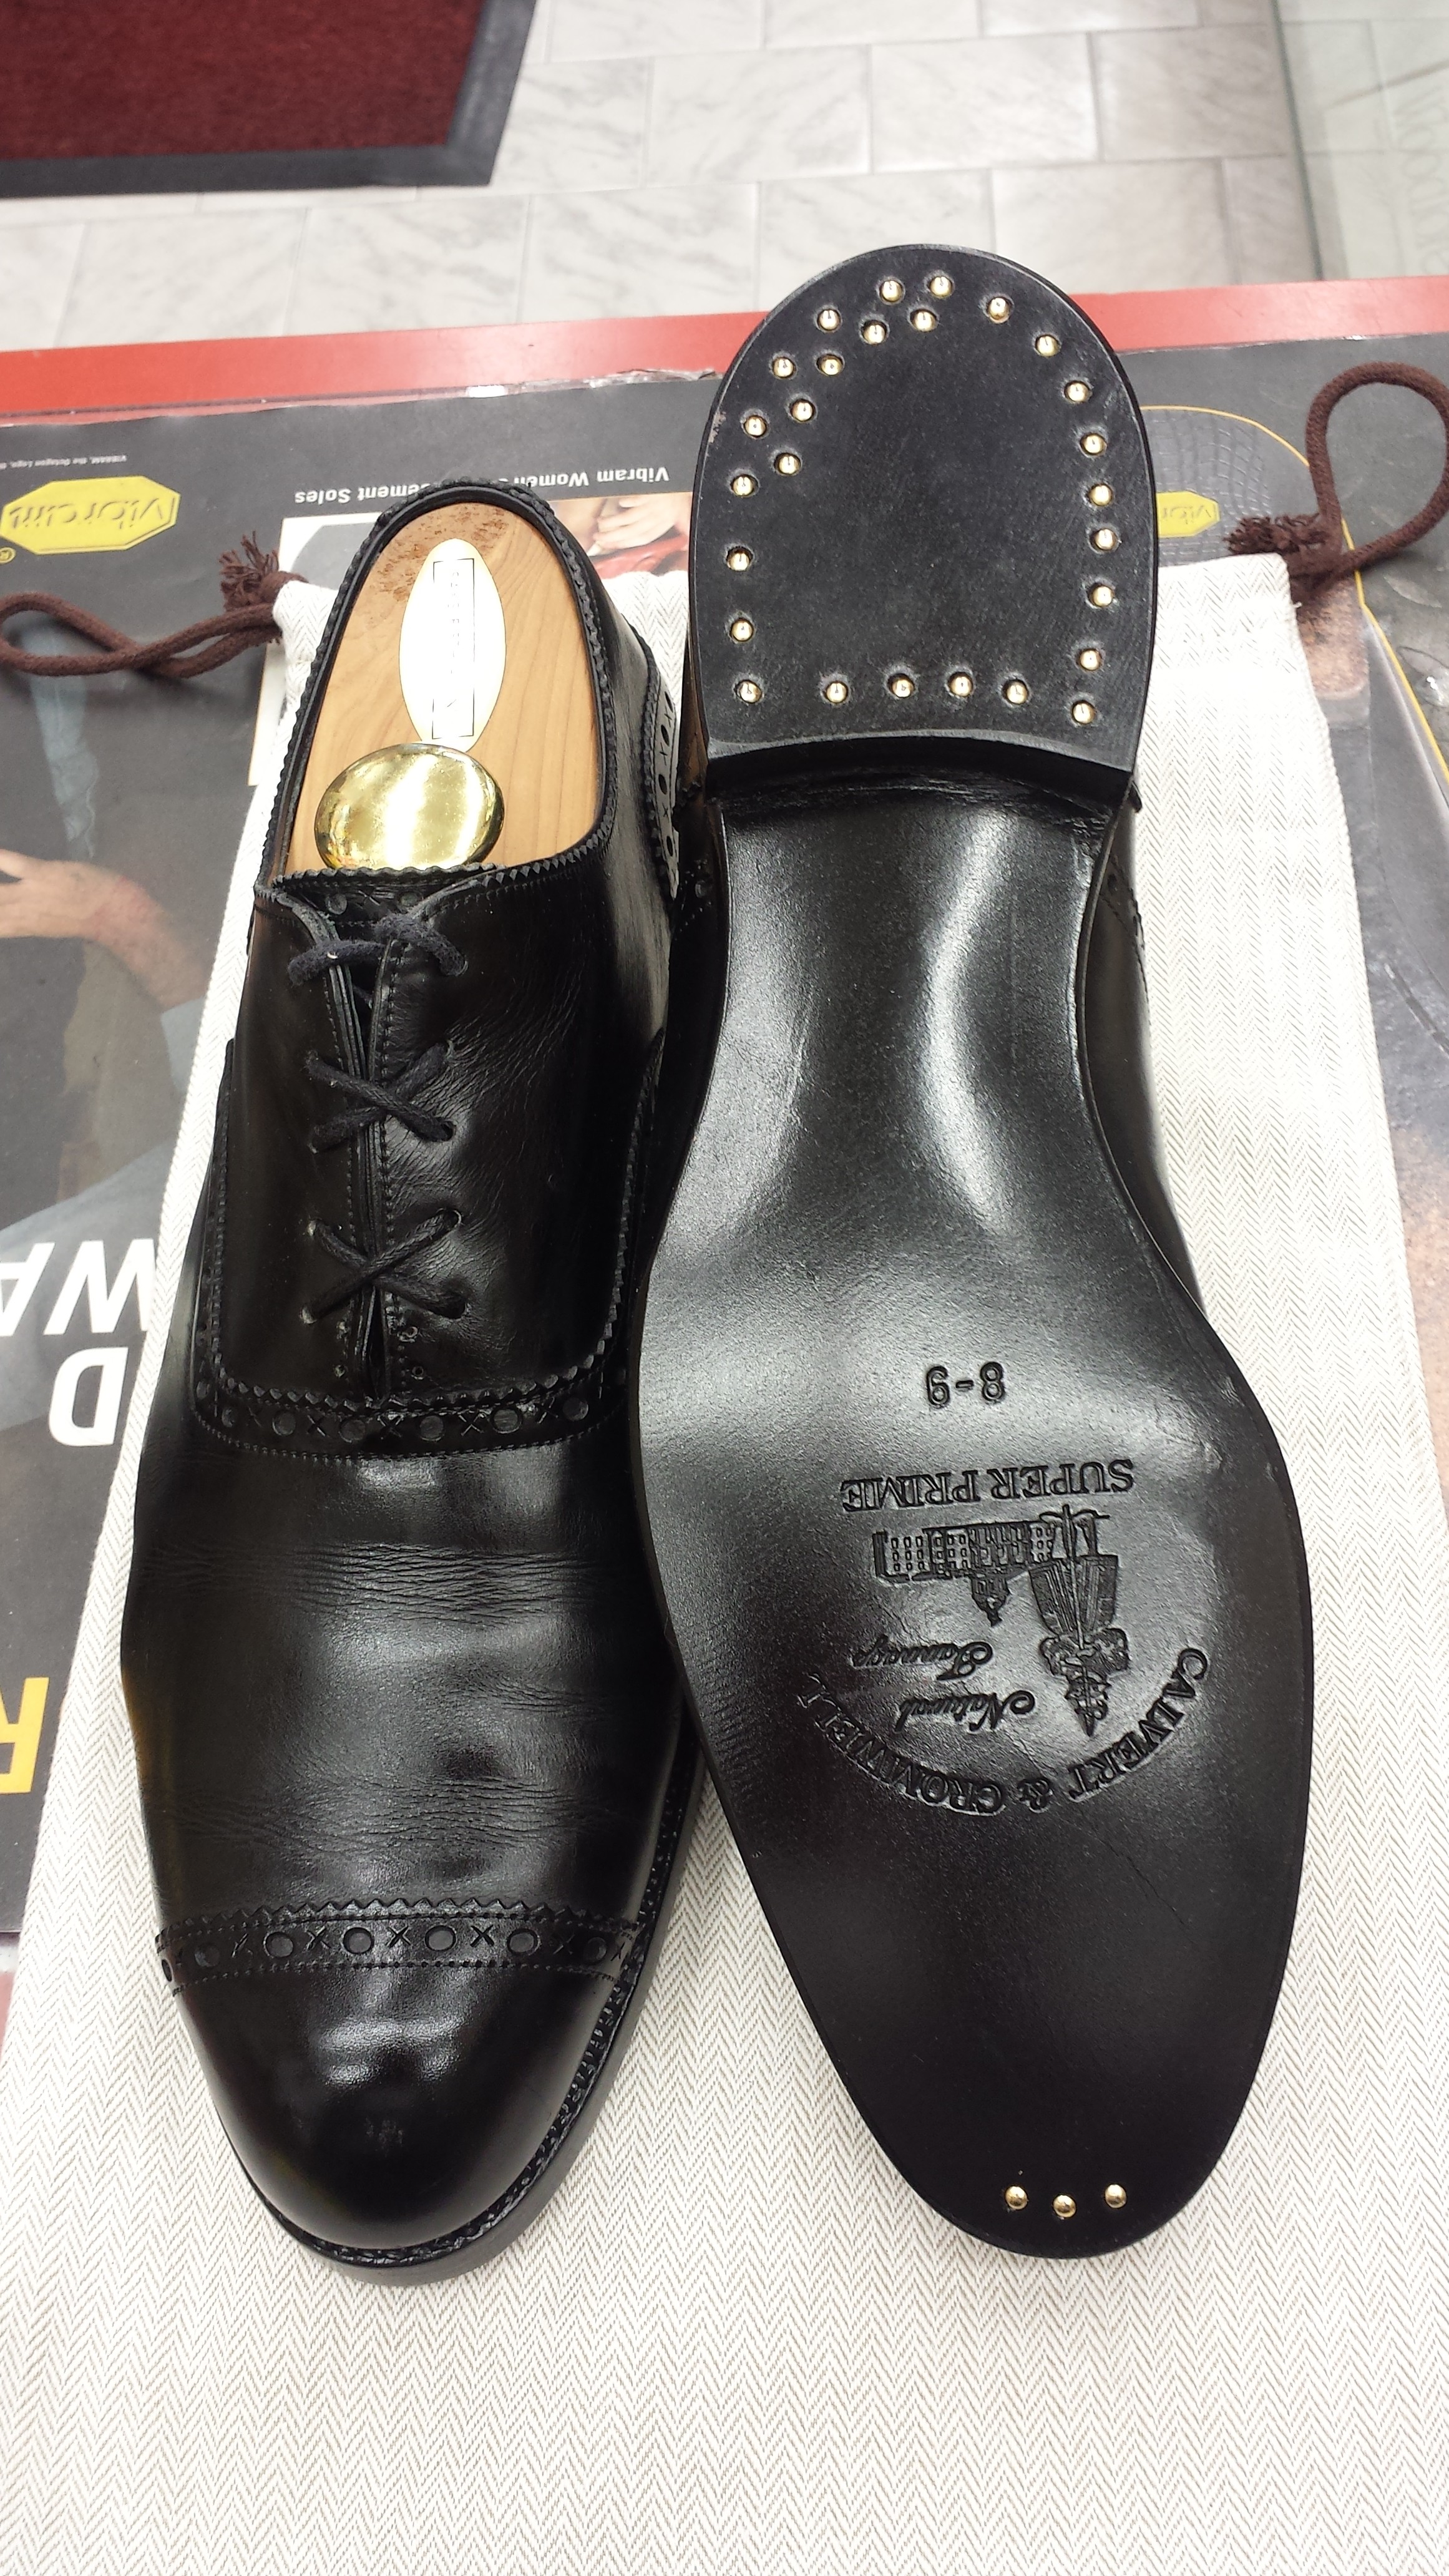 leather sole replacement cost